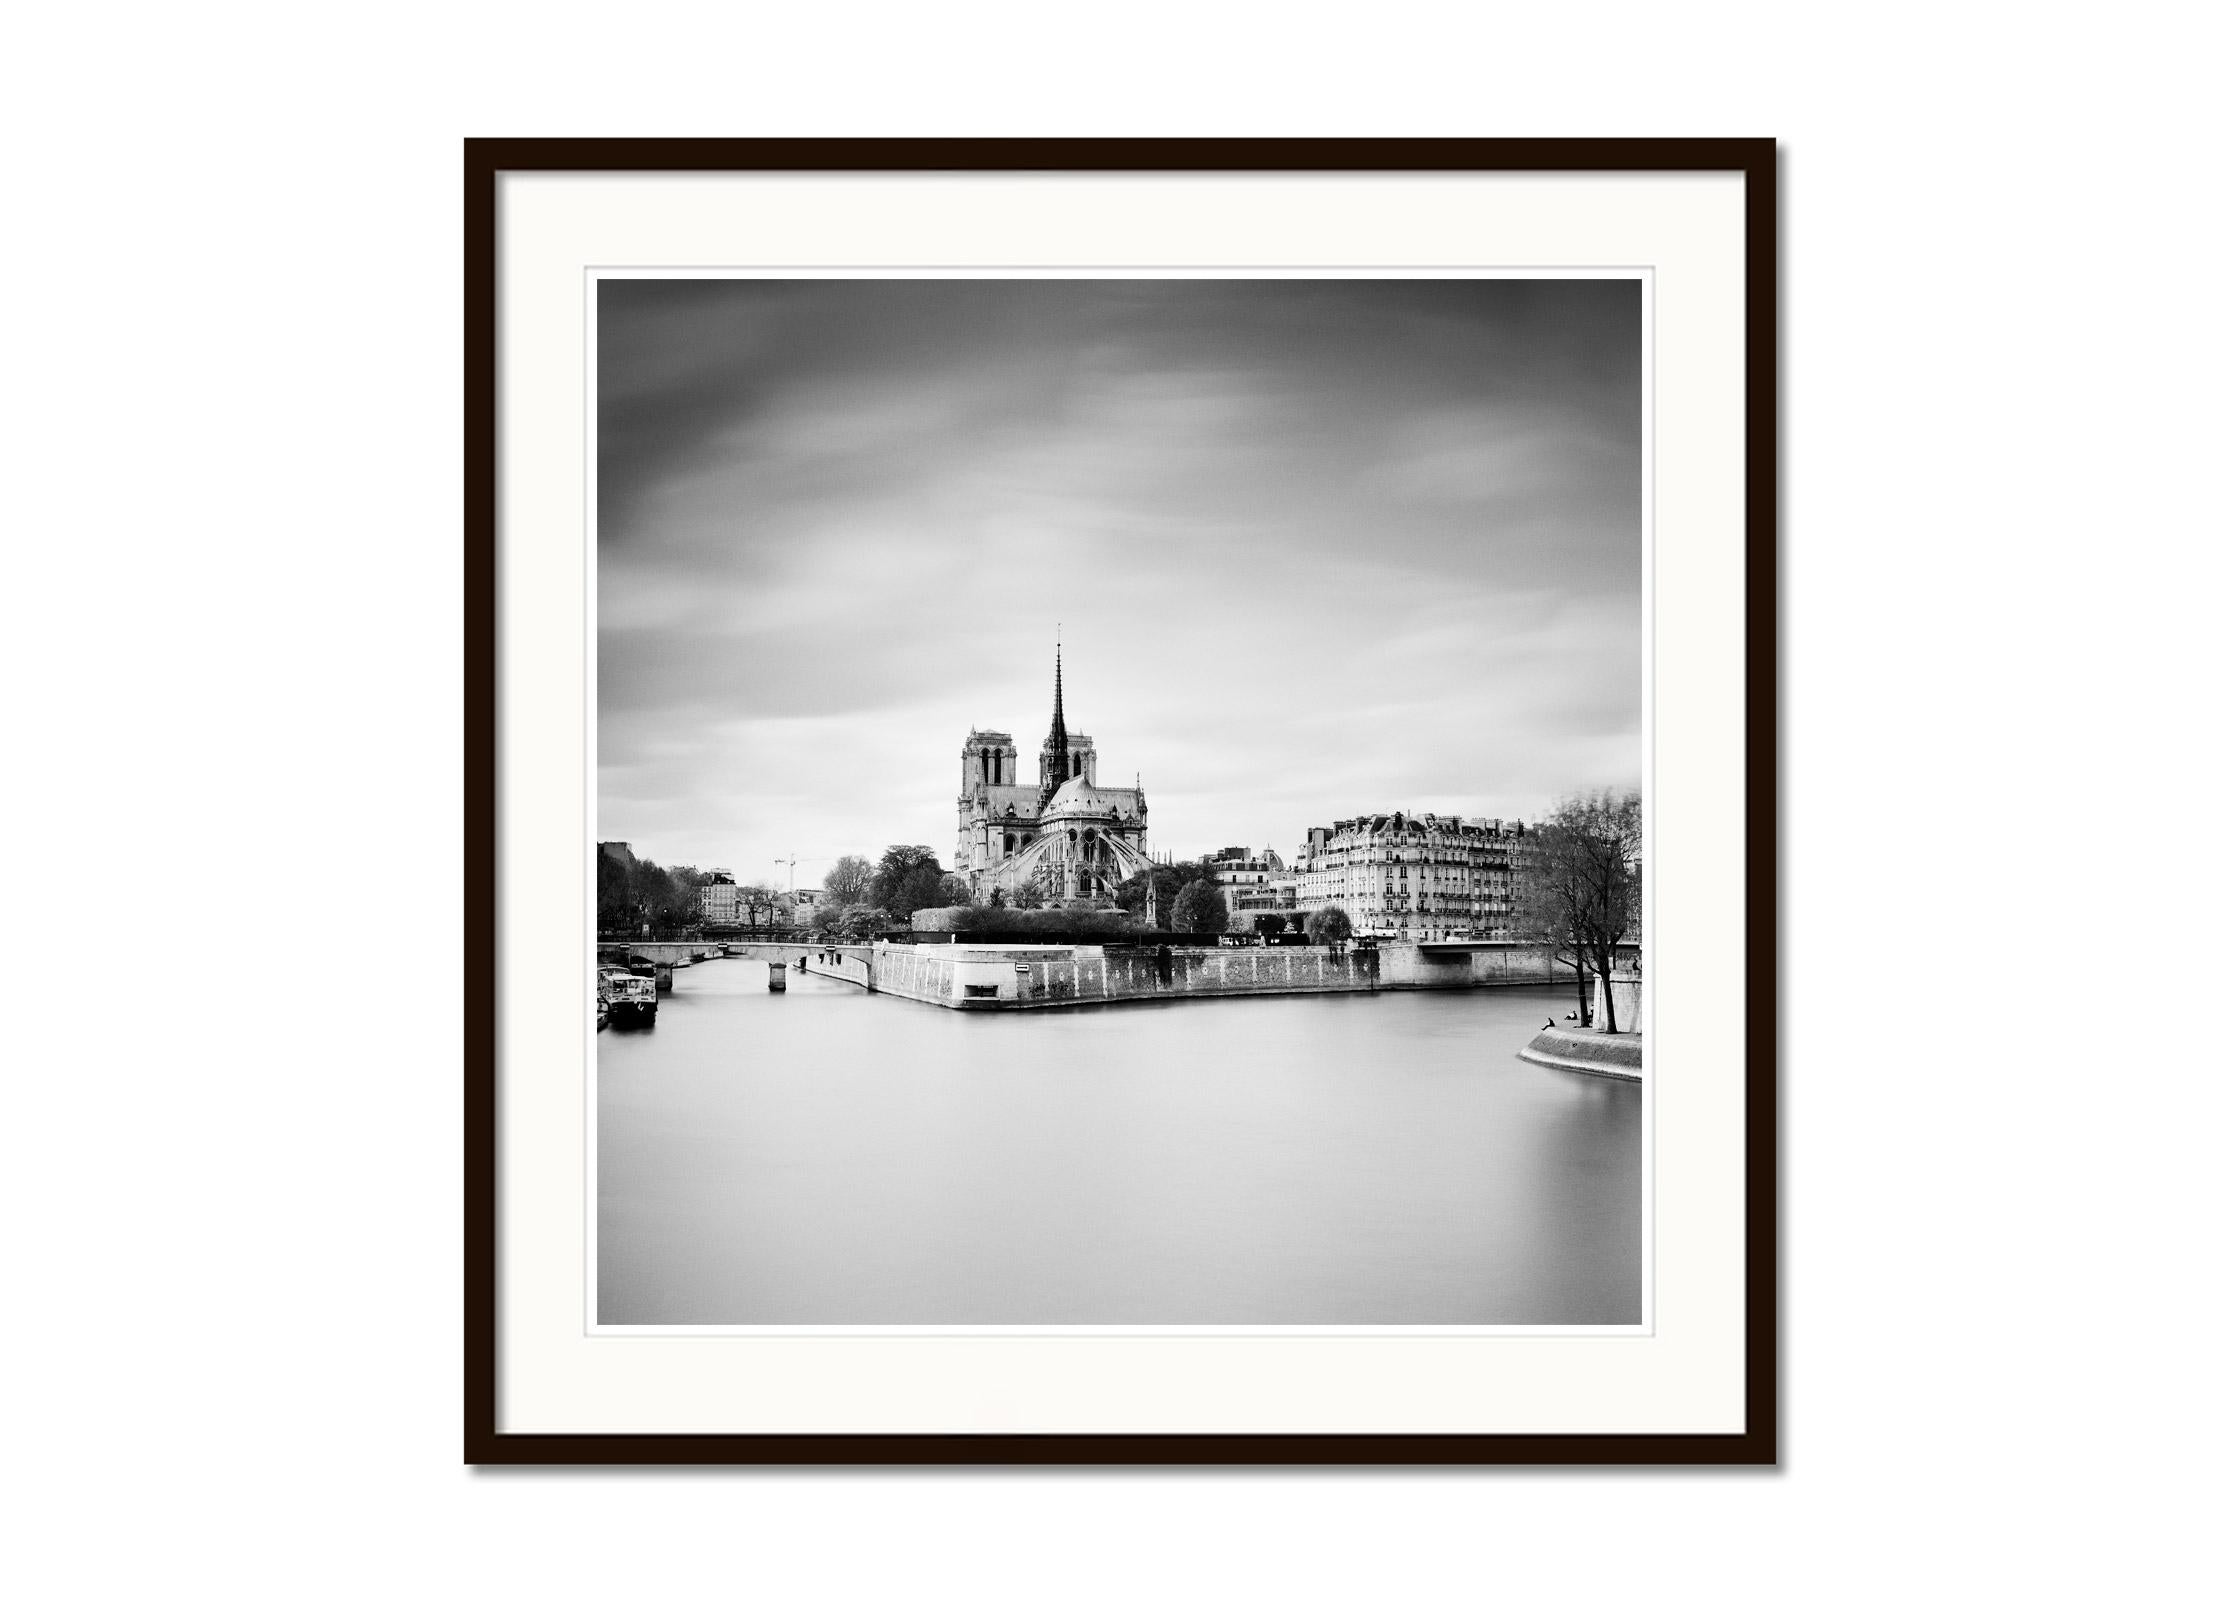 Gerald Berghammer - Limited edition of 9.
Archival fine art pigment print. Signed, titled, dated and numbered by artist. Certificate of authenticity included. Printed with 4cm white border.
15.75 x 15.75 in. (40 x 40 cm) edition of 9
23.63 x 23.63